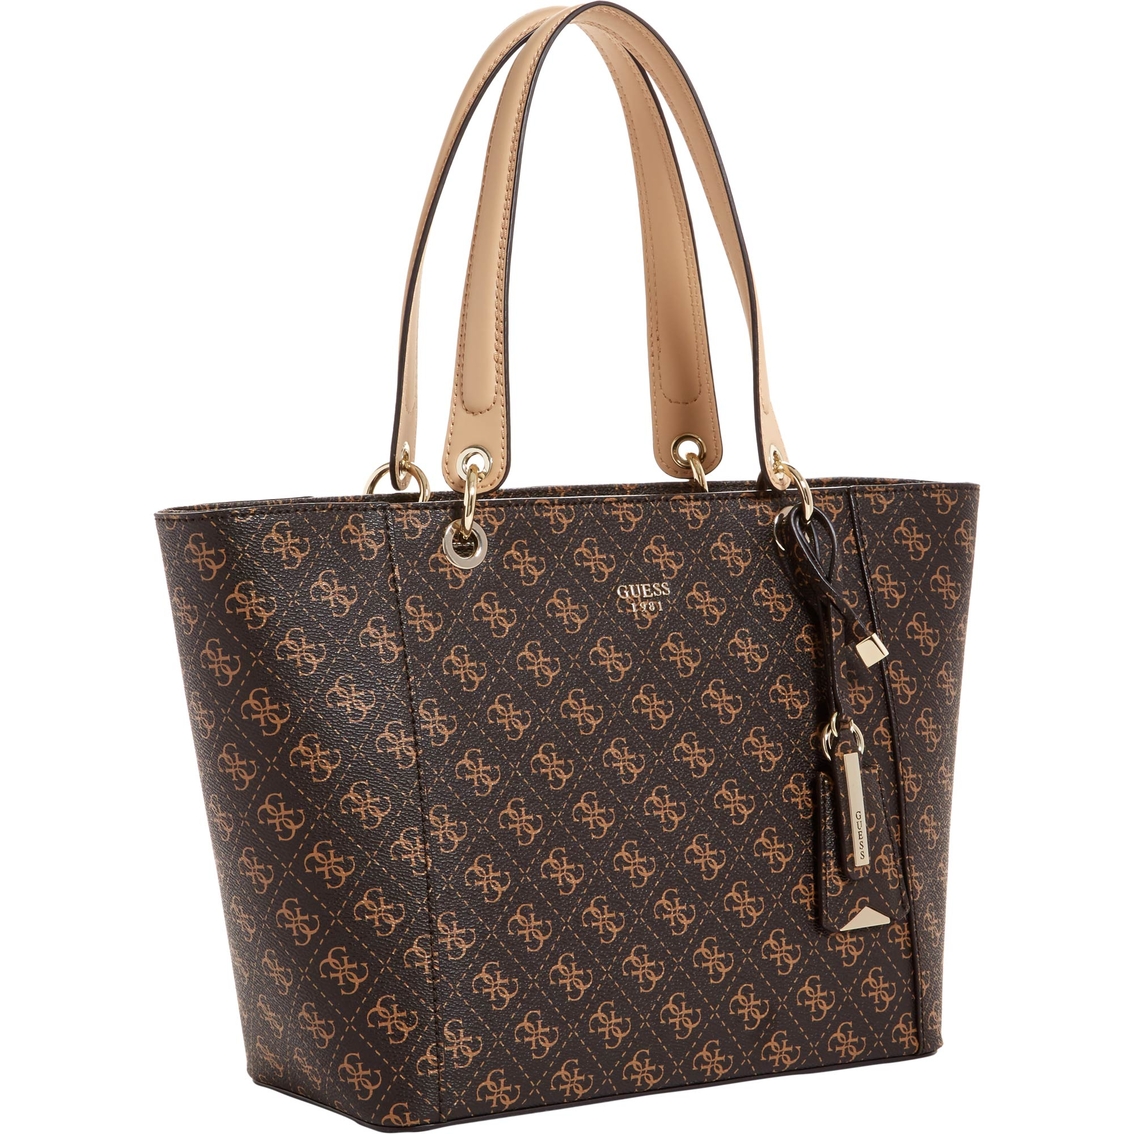 Guess Karyn Double Handle Tote - Image 2 of 2